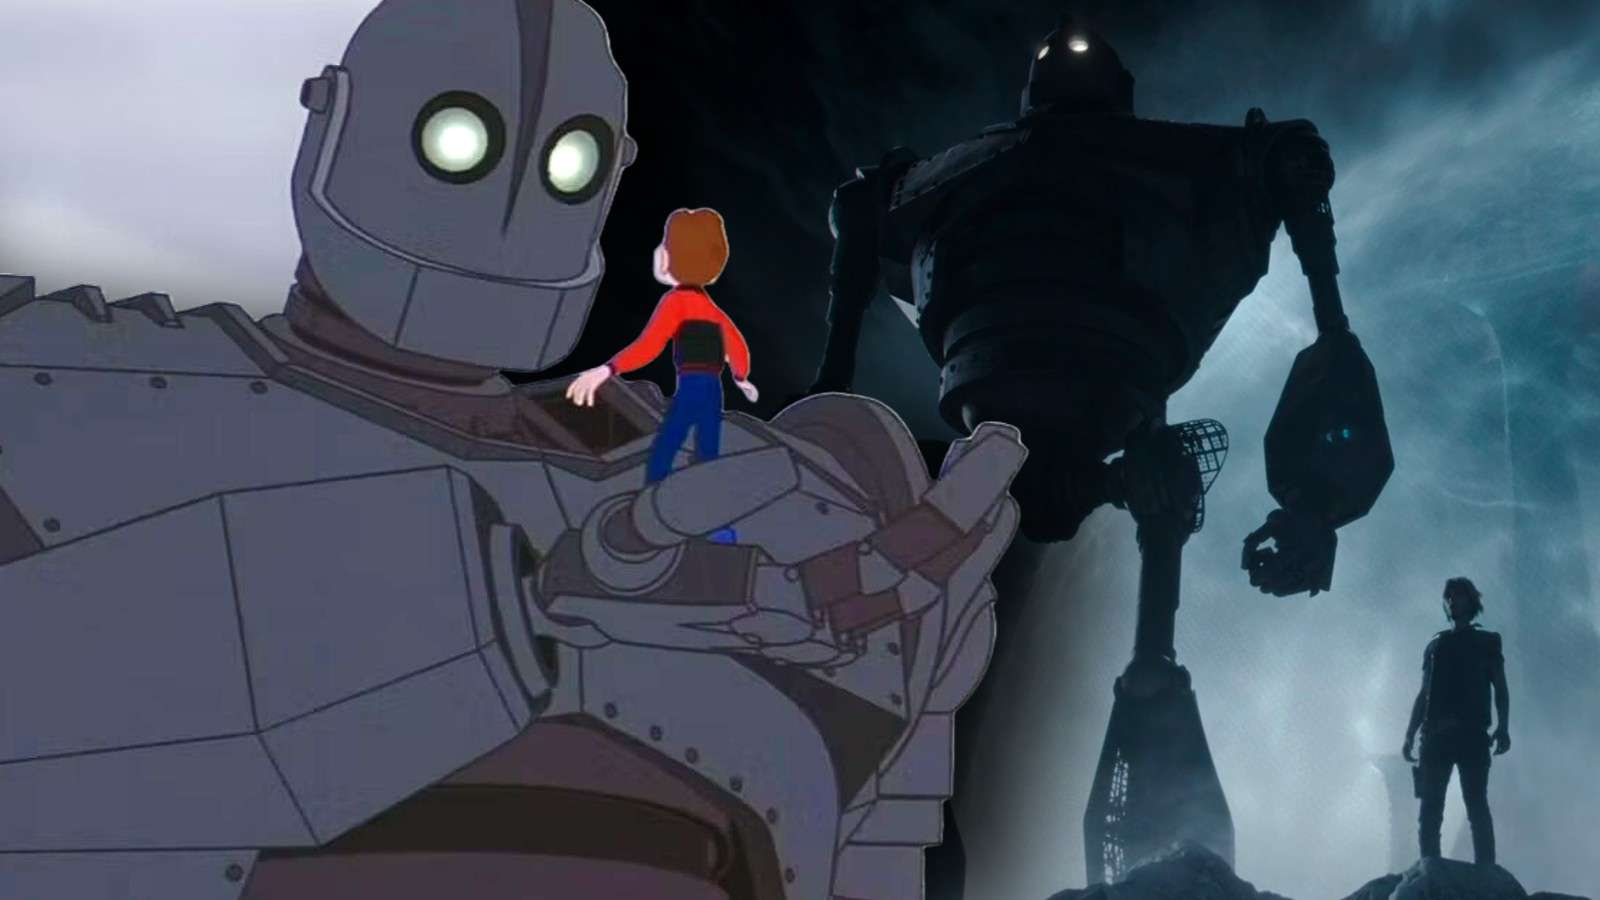 A still from The Iron Giant and Ready Player One